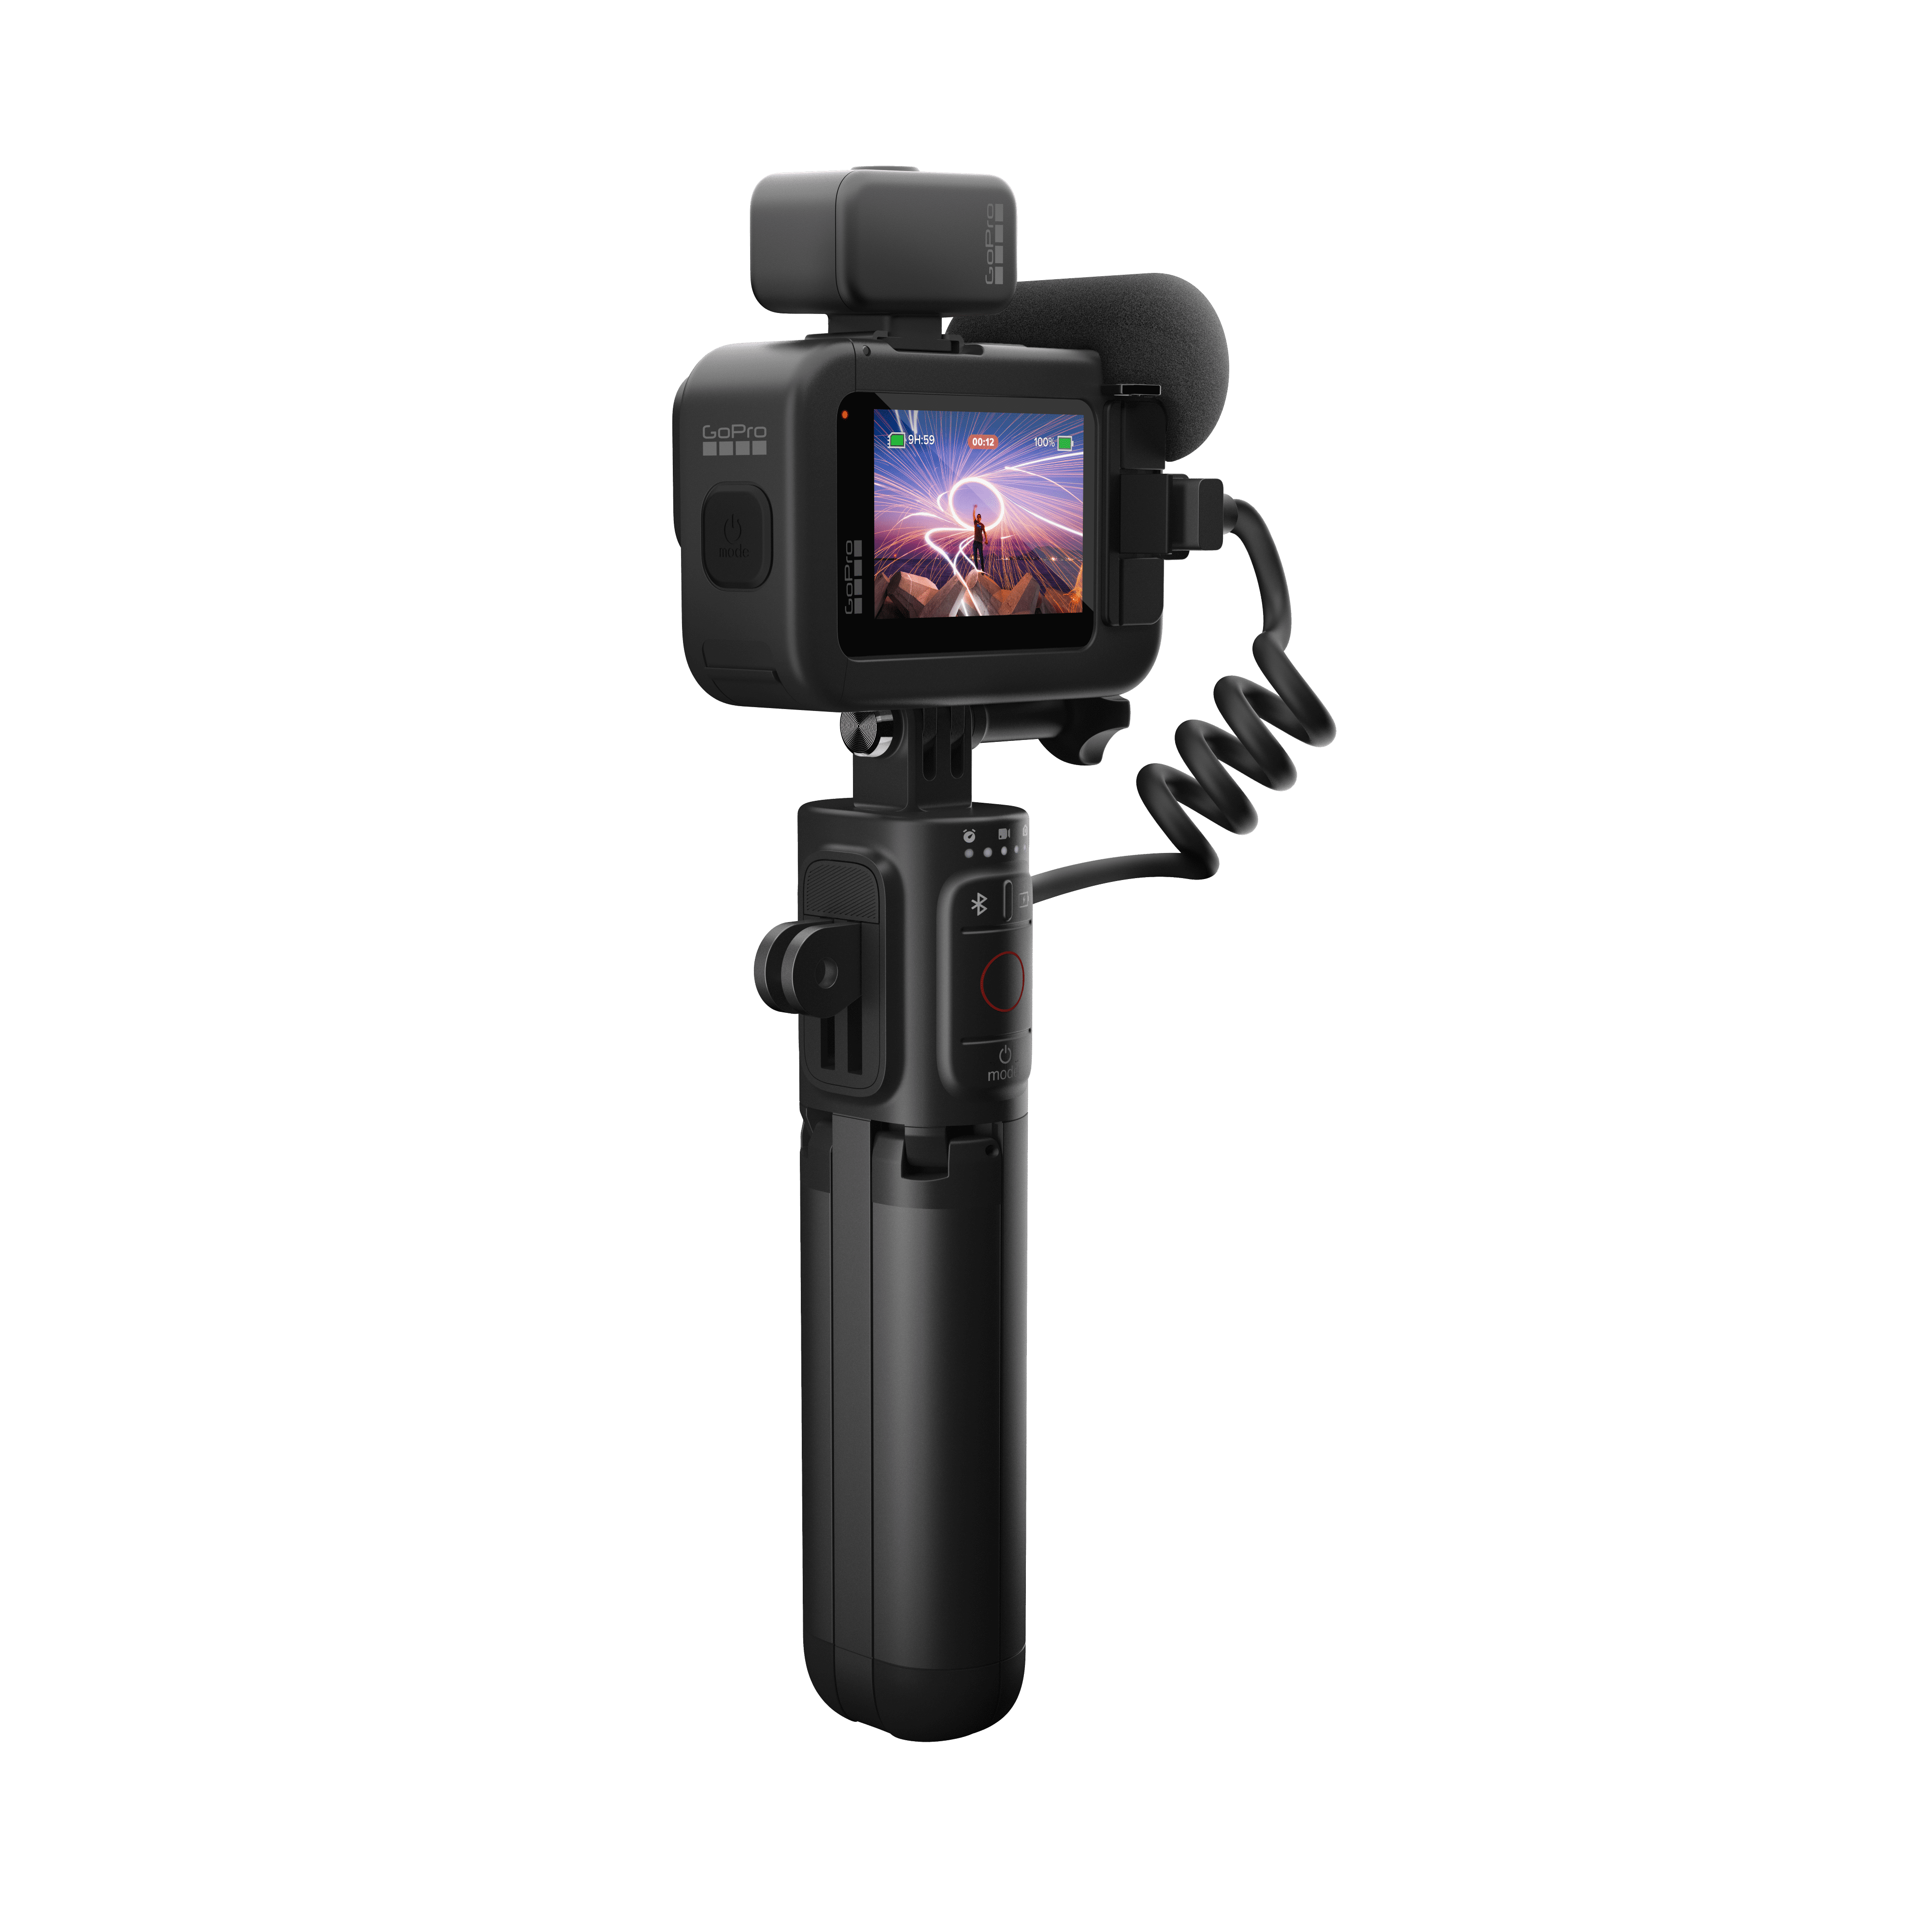  Go Pro HERO12 Black Creator Edition - Includes Volta (Battery  Grip, Tripod, Remote), Media Mod, Light Mod, Waterproof Action Camera +  64GB Card, 50 Piece Accessory Kit and 2 Extra Batteries : Electronics